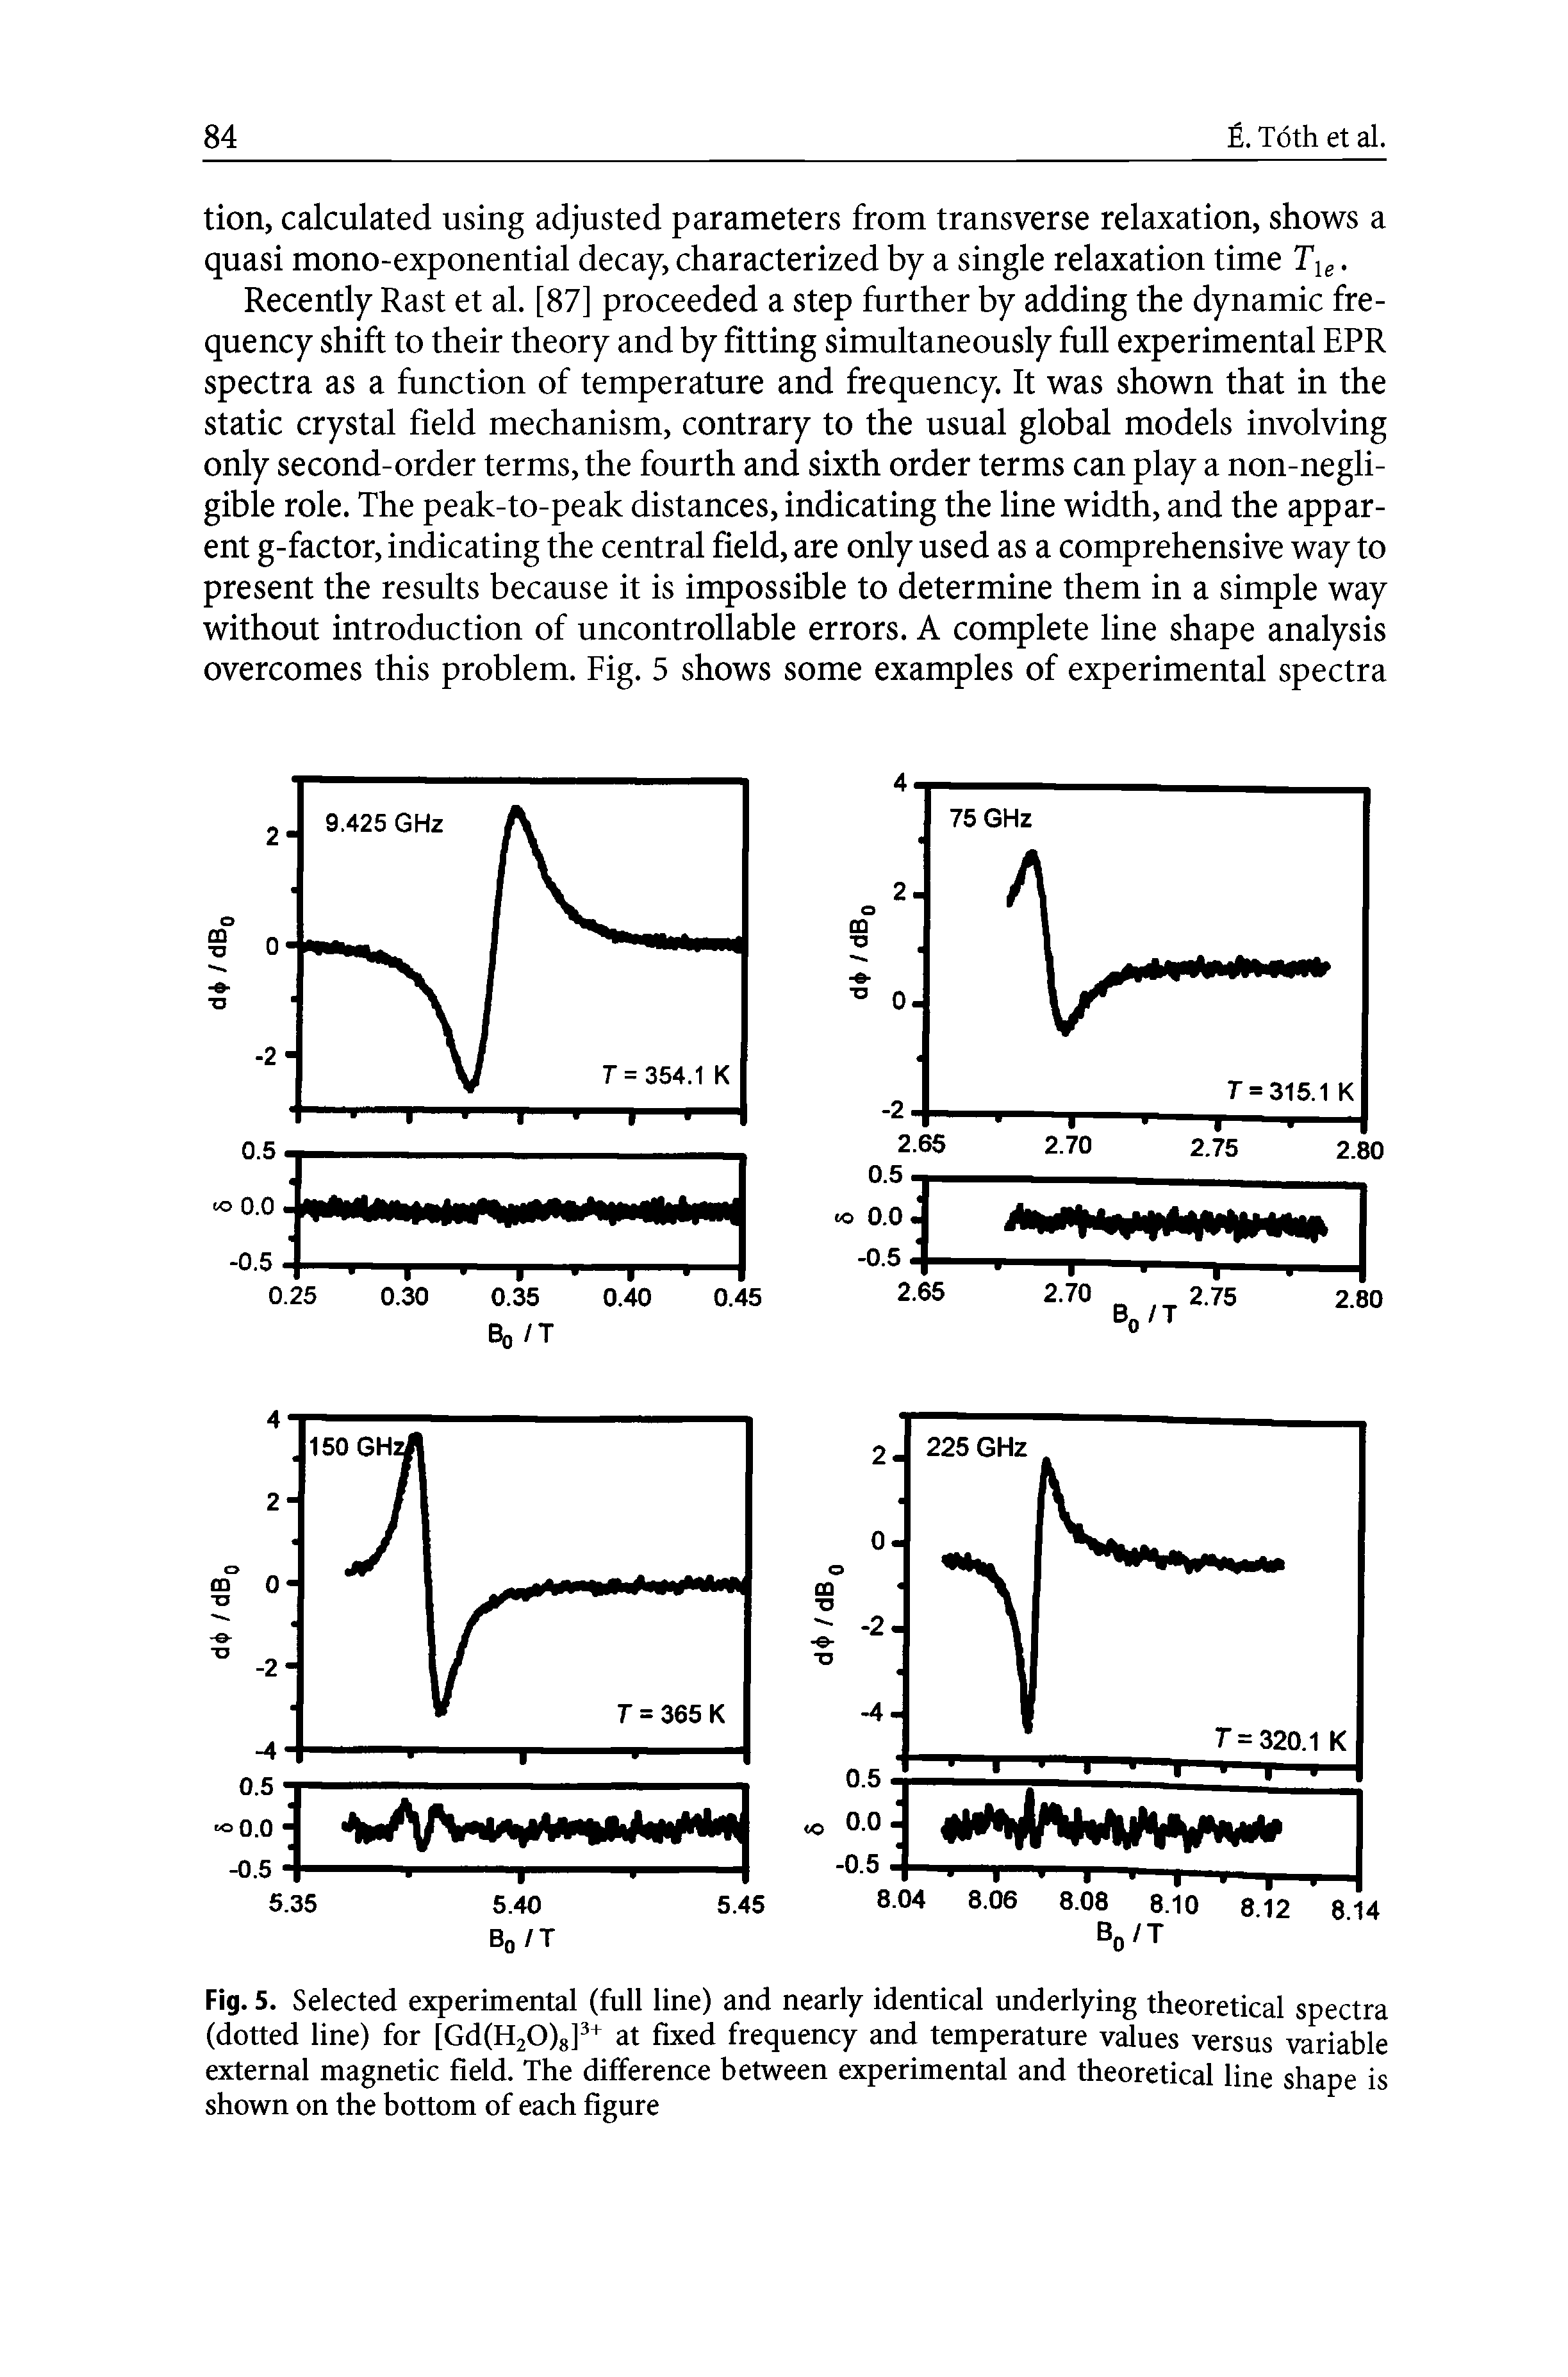 Fig. 5. Selected experimental (full line) and nearly identical underlying theoretical spectra (dotted line) for [Gd(H20)8]3+ at fixed frequency and temperature values versus variable external magnetic field. The difference between experimental and theoretical line shape is shown on the bottom of each figure...